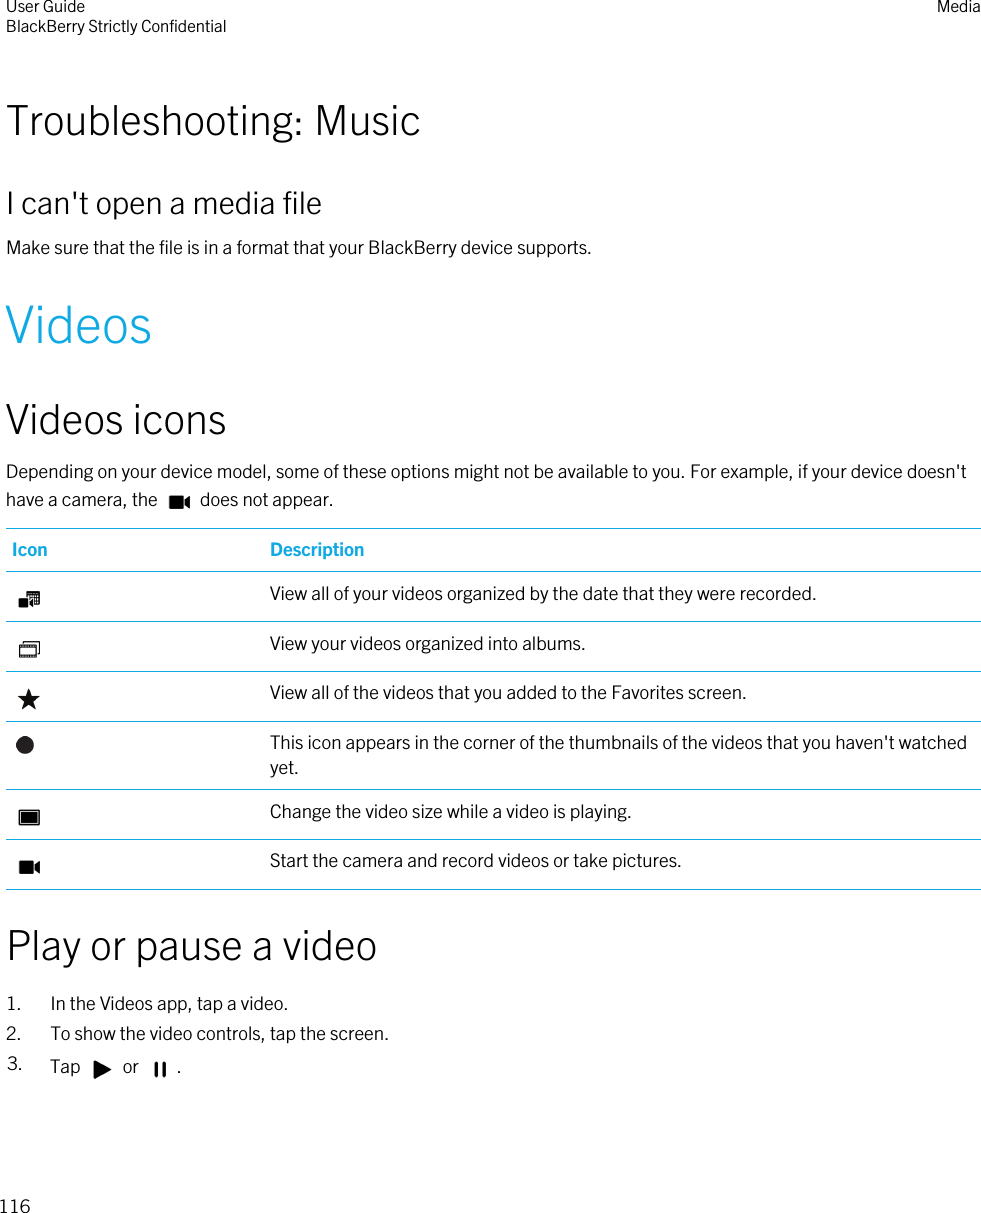 Troubleshooting: MusicI can&apos;t open a media fileMake sure that the file is in a format that your BlackBerry device supports.VideosVideos iconsDepending on your device model, some of these options might not be available to you. For example, if your device doesn&apos;t have a camera, the   does not appear.Icon DescriptionView all of your videos organized by the date that they were recorded.View your videos organized into albums.View all of the videos that you added to the Favorites screen.This icon appears in the corner of the thumbnails of the videos that you haven&apos;t watched yet.Change the video size while a video is playing.Start the camera and record videos or take pictures.Play or pause a video1. In the Videos app, tap a video.2. To show the video controls, tap the screen.3. Tap   or  .User GuideBlackBerry Strictly Confidential Media116